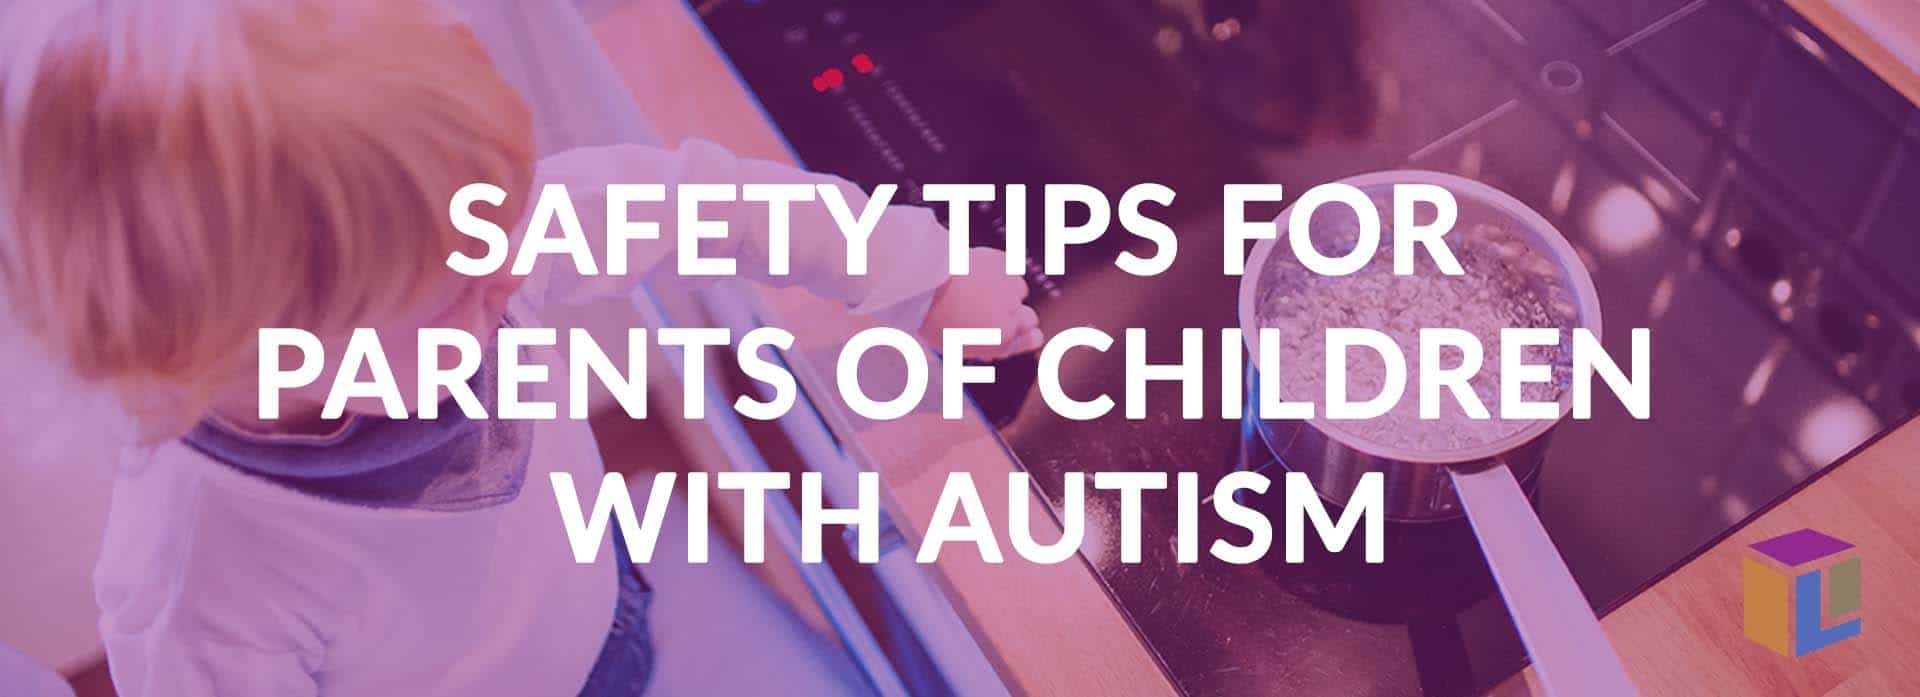 Safety Tips For Parents Of Children With Autism Safety Tips For Parents Of Children With Autism Safety Tips For Parents Of Children With Autism Safety Tips For Parents Of Children With Autism